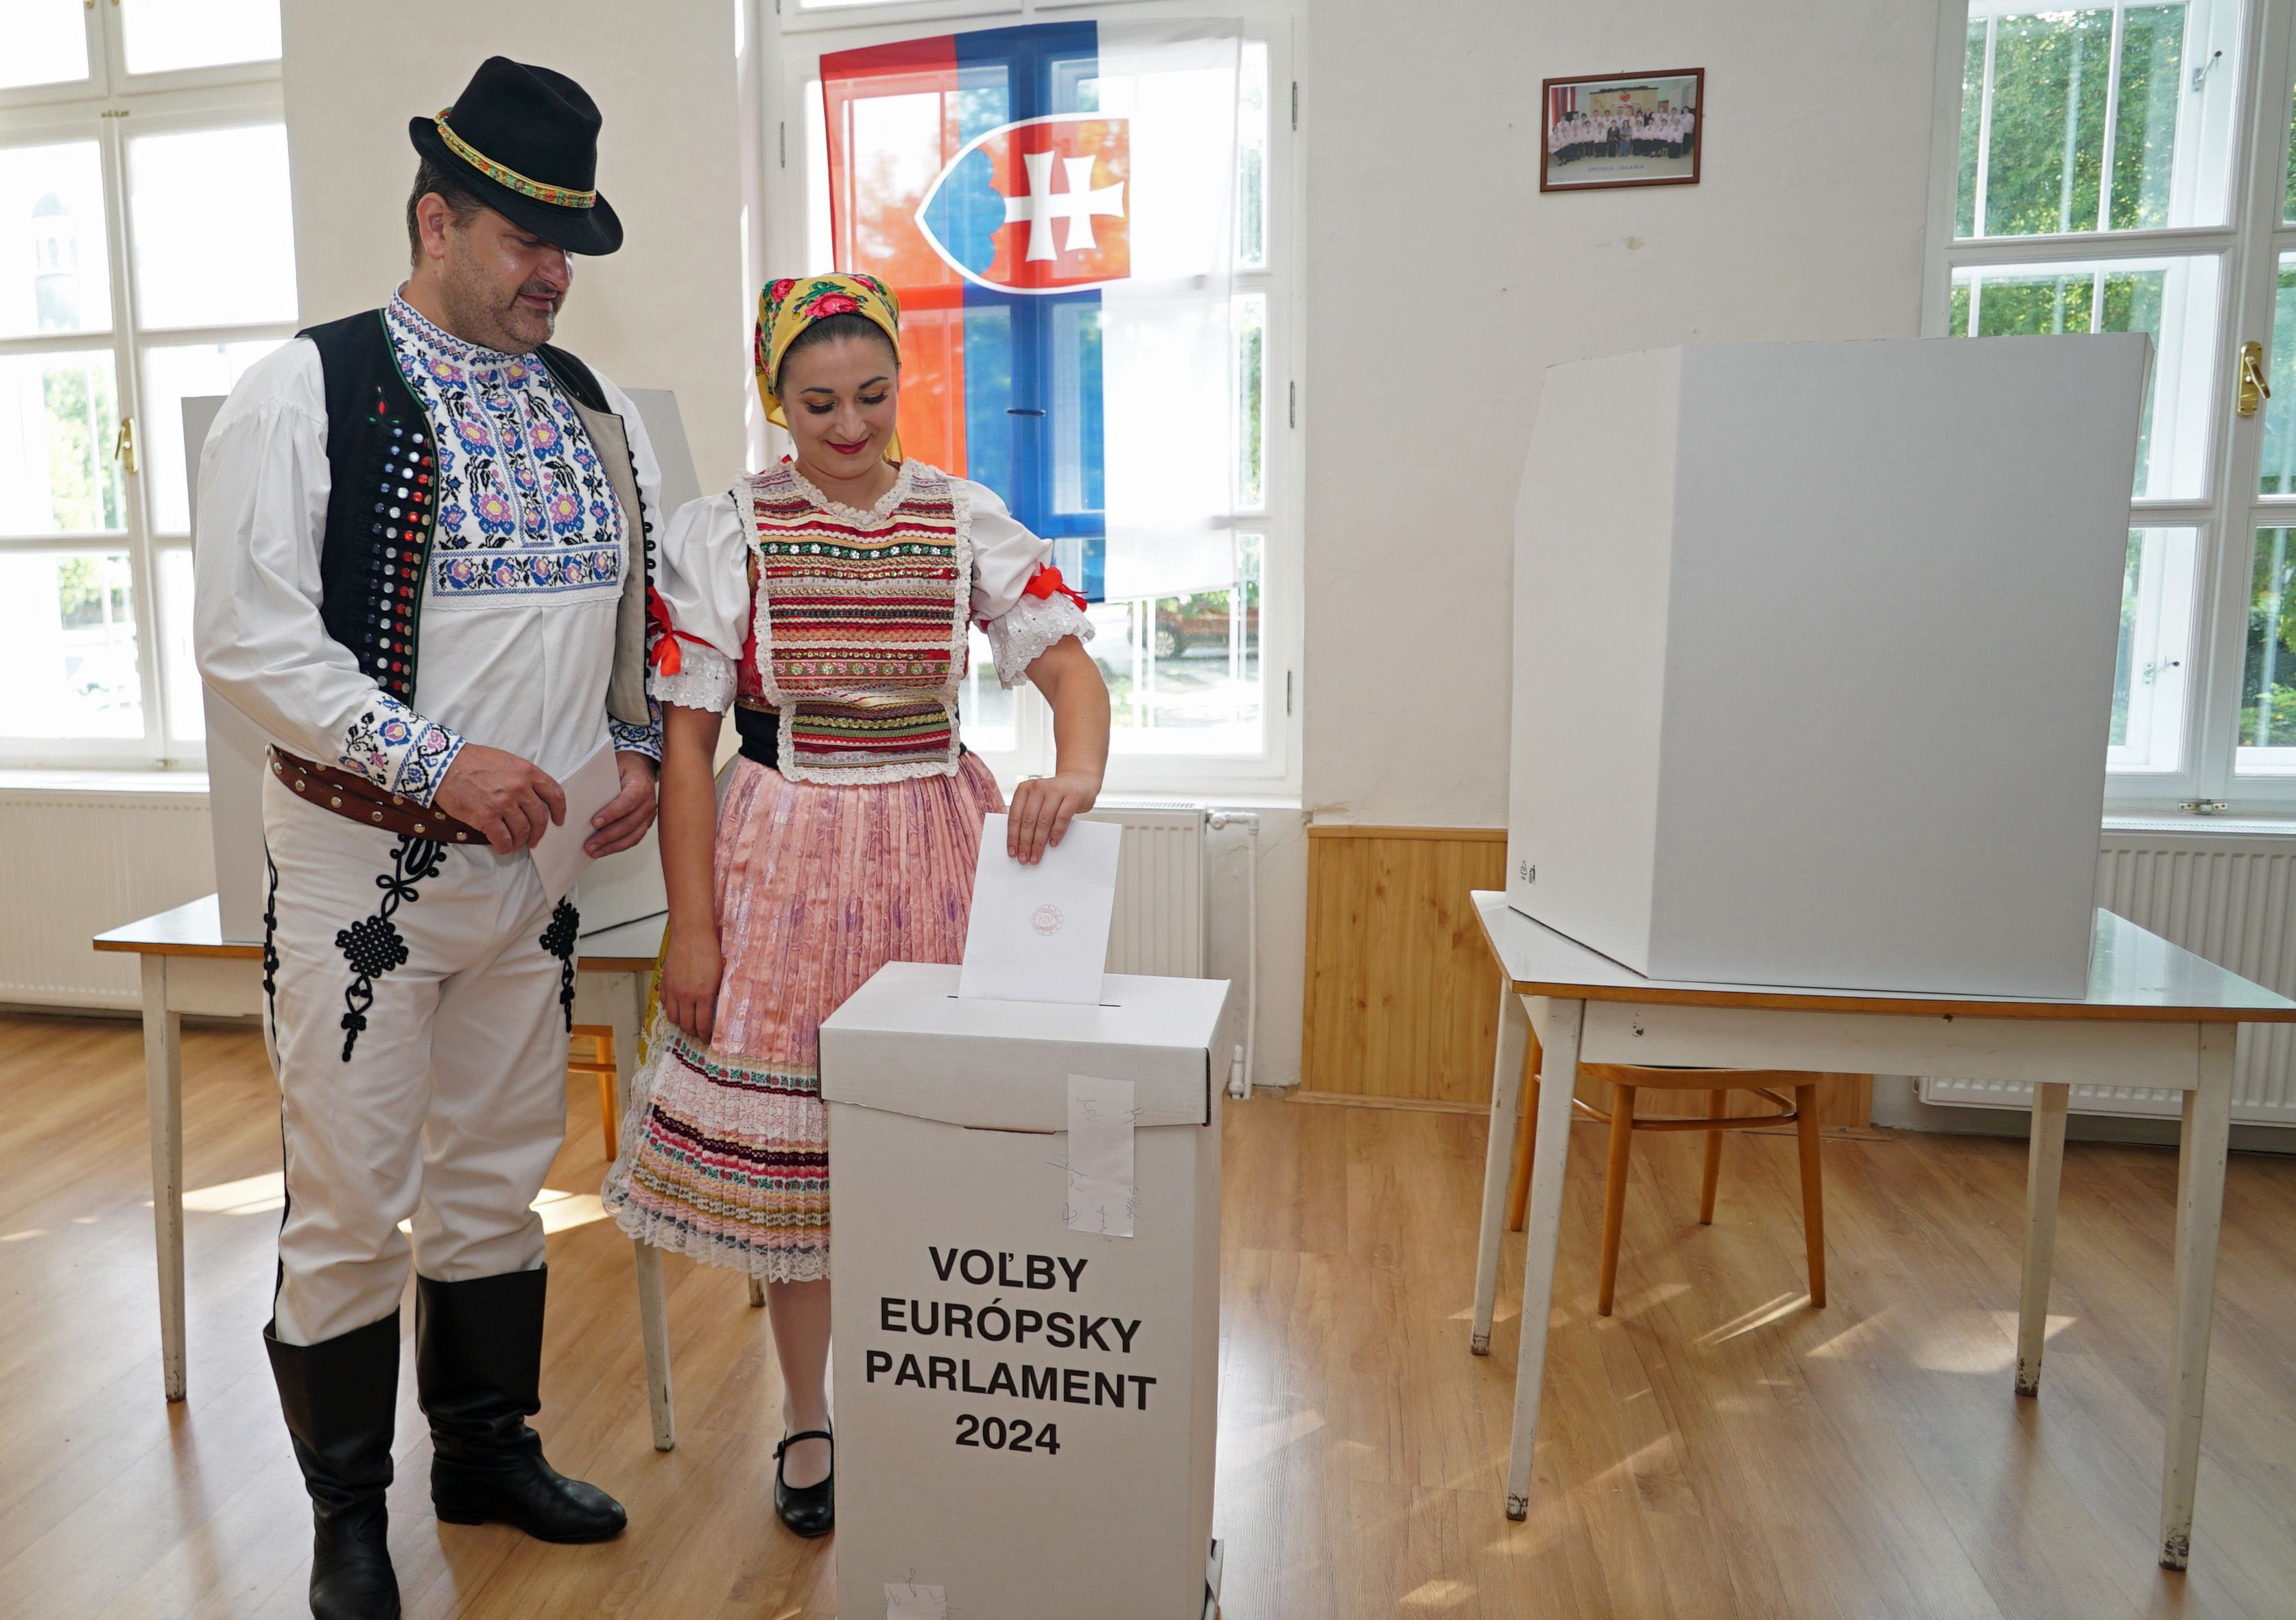 Citizens vote at a polling station in Komrna, Slovakia, on Saturday during the European Parliament elections. Photo: dpa 